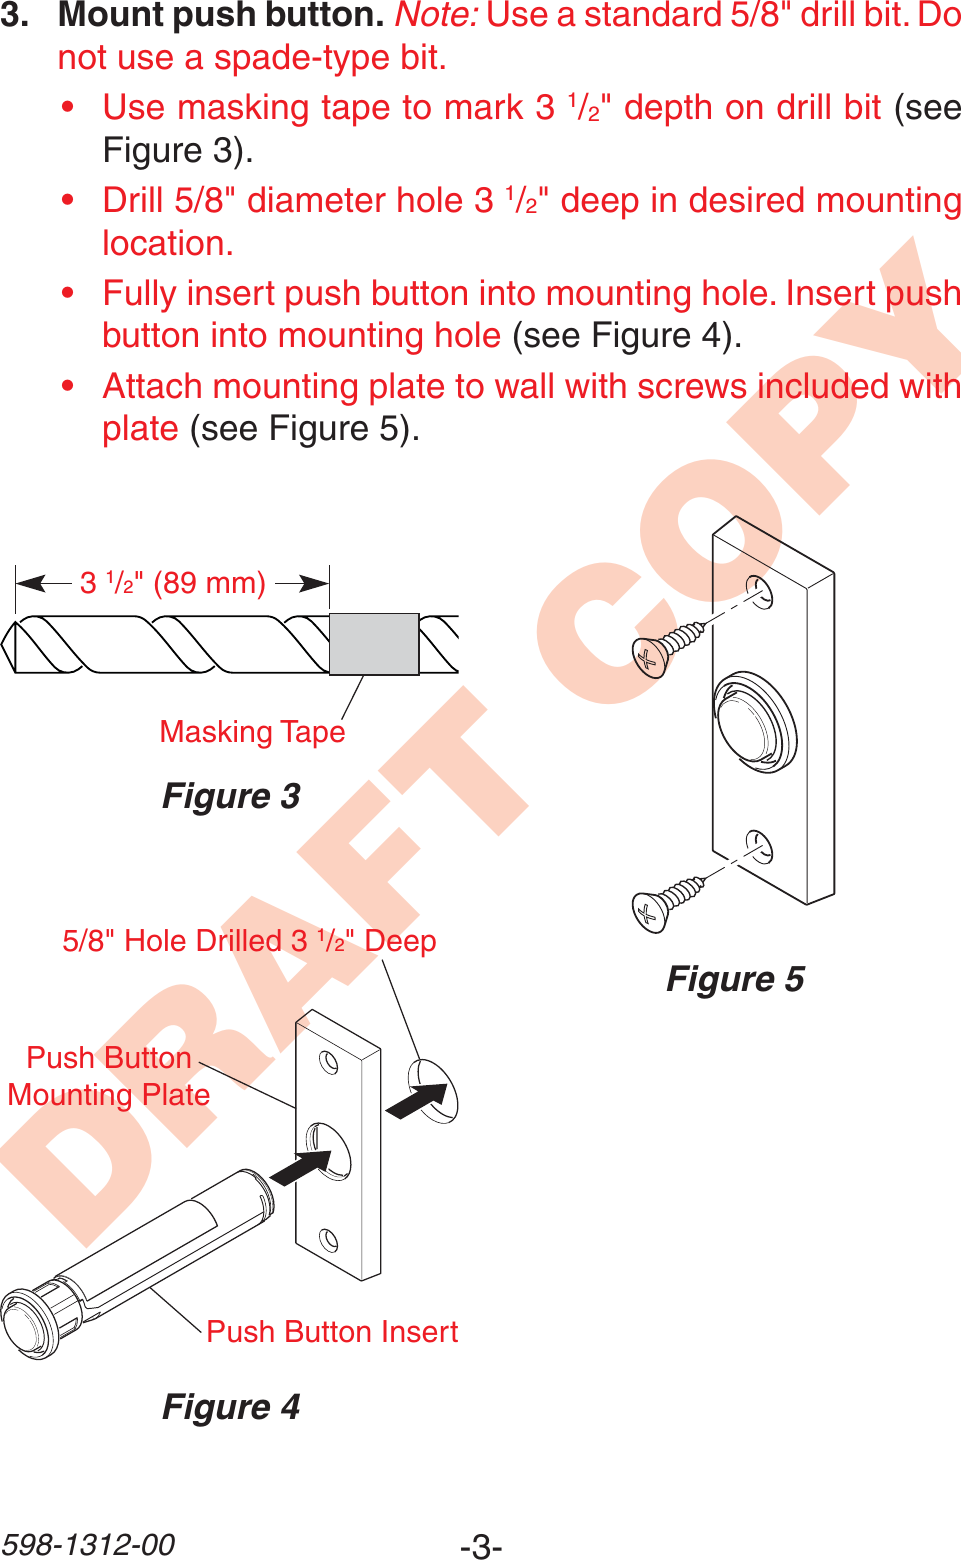 -3-598-1312-00DRAFT COPY3. Mount push button. Note: Use a standard 5/8&quot; drill bit. Do not use a spade-type bit.• Use masking tape to mark 3 1/2&quot; depth on drill bit (see Figure 3).• Drill 5/8&quot; diameter hole 3 1/2&quot; deep in desired mounting location.• Fully insert push button into mounting hole. Insert push button into mounting hole (see Figure 4).• Attach mounting plate to wall with screws included with plate (see Figure 5).Figure 331/2&quot; (89 mm)Masking TapeFigure 5Figure 4Push Button InsertPush Button Mounting Plate5/8&quot; Hole Drilled 3 1/2&quot; Deep